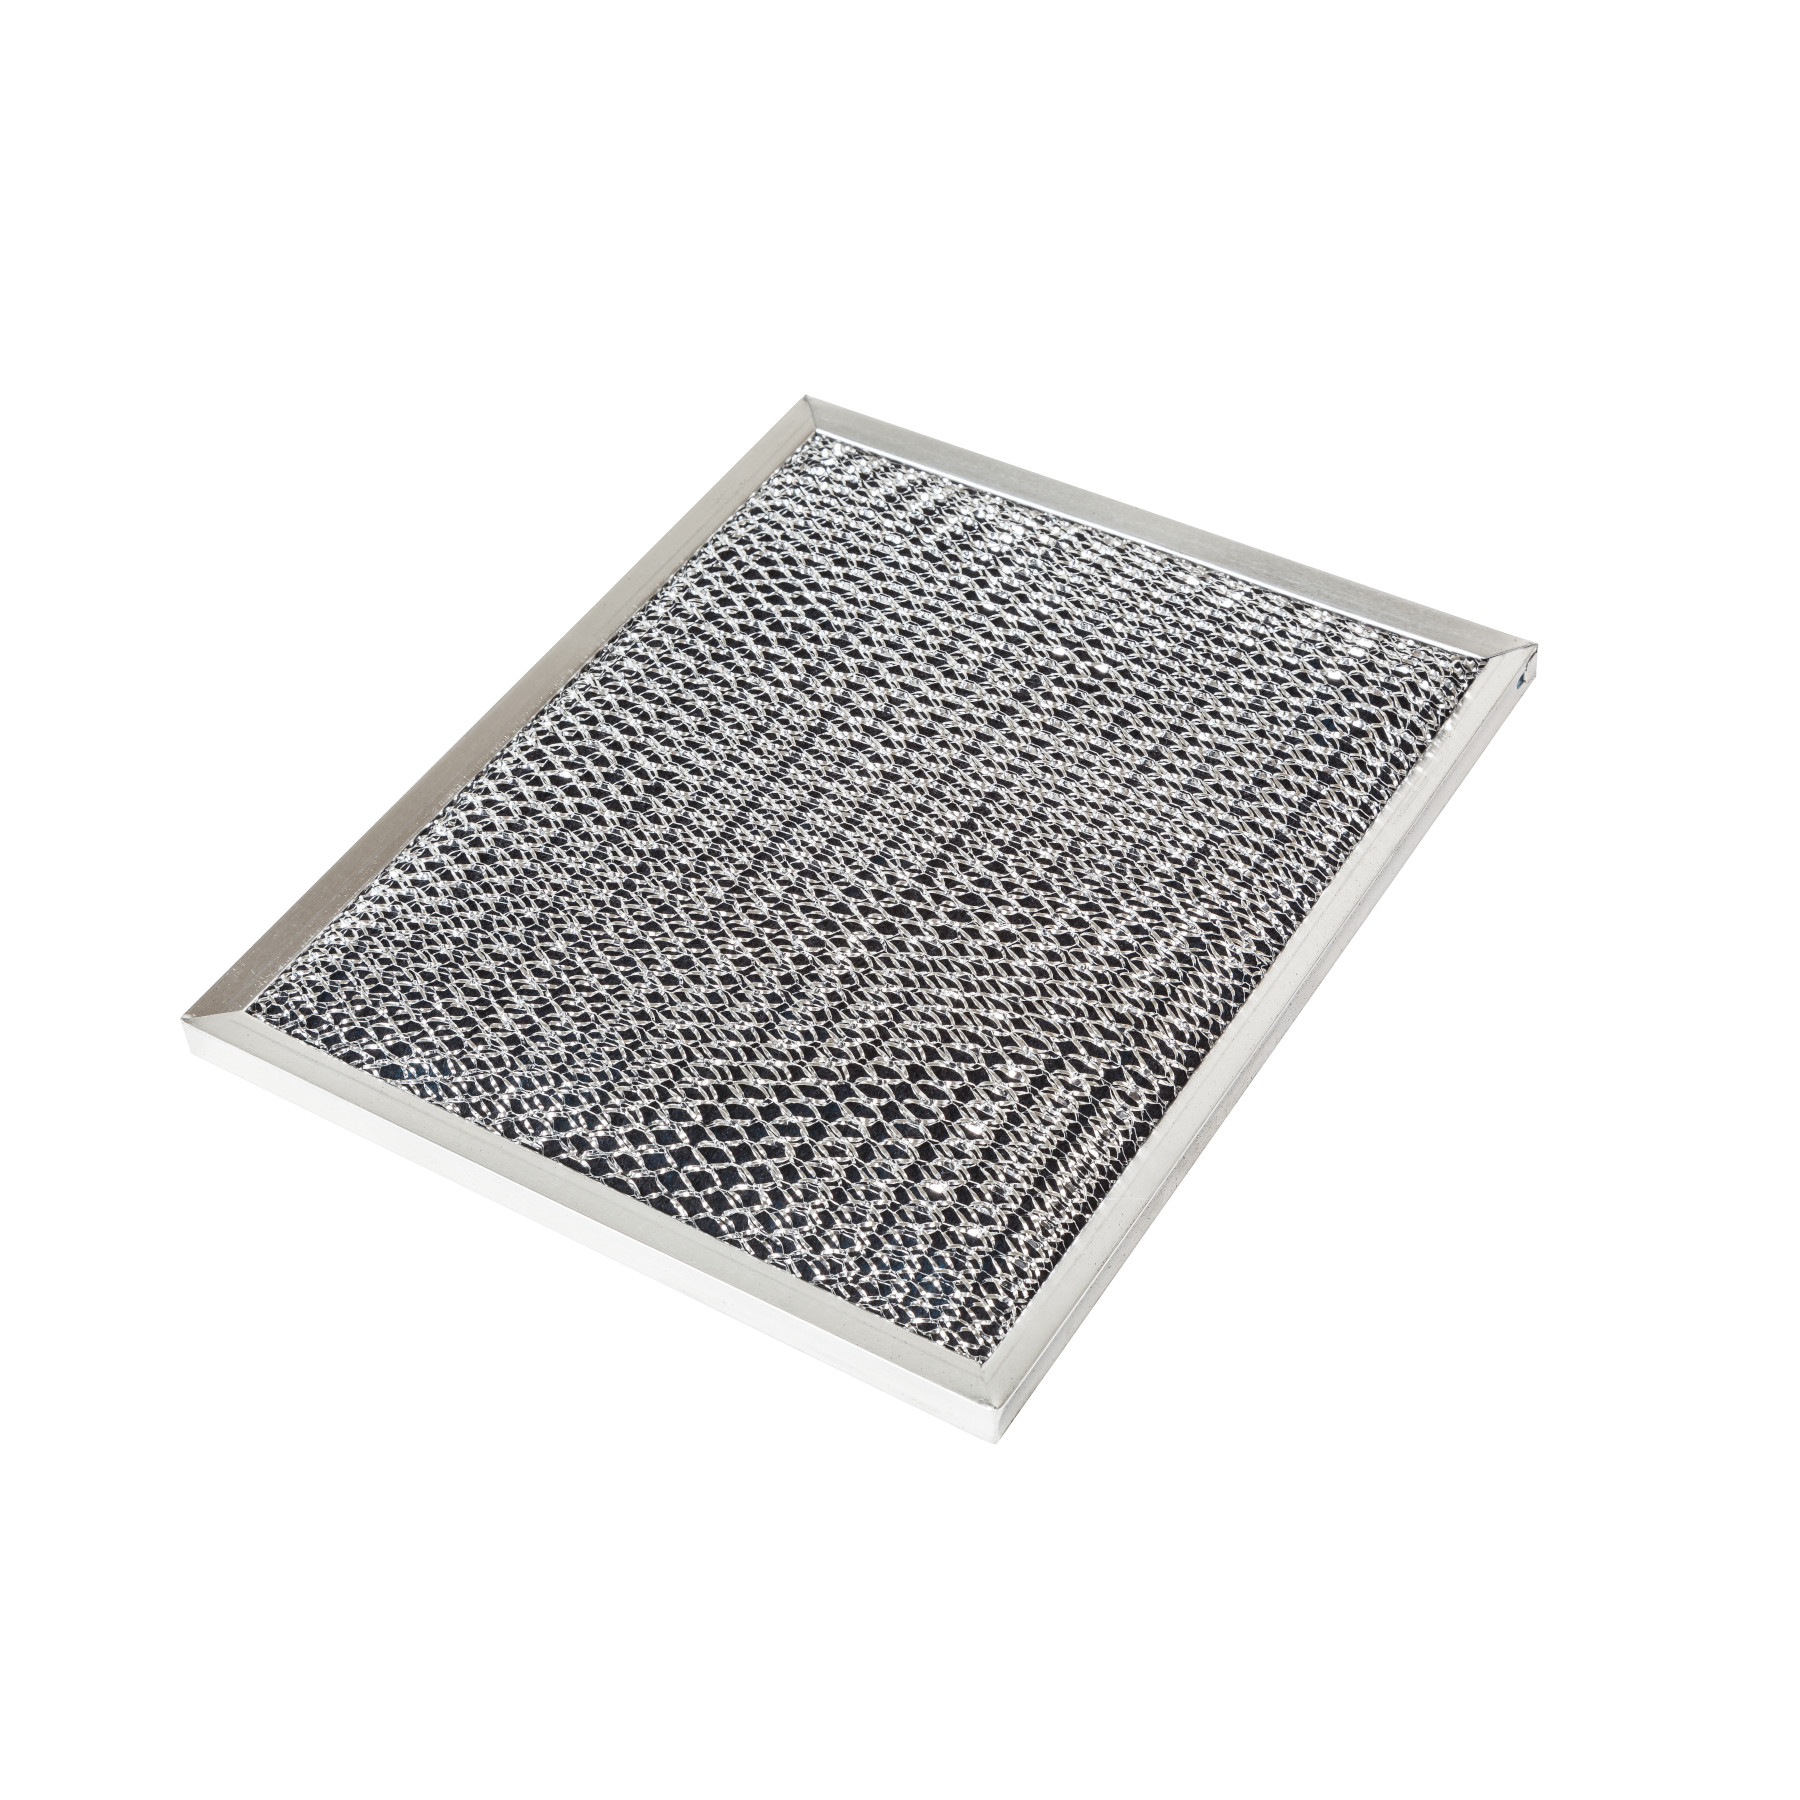 Non-Duct Charcoal Replacement Filter for use with Select Broan® Range Hoods 8-3/4" x 10-1/2" x 3/8"